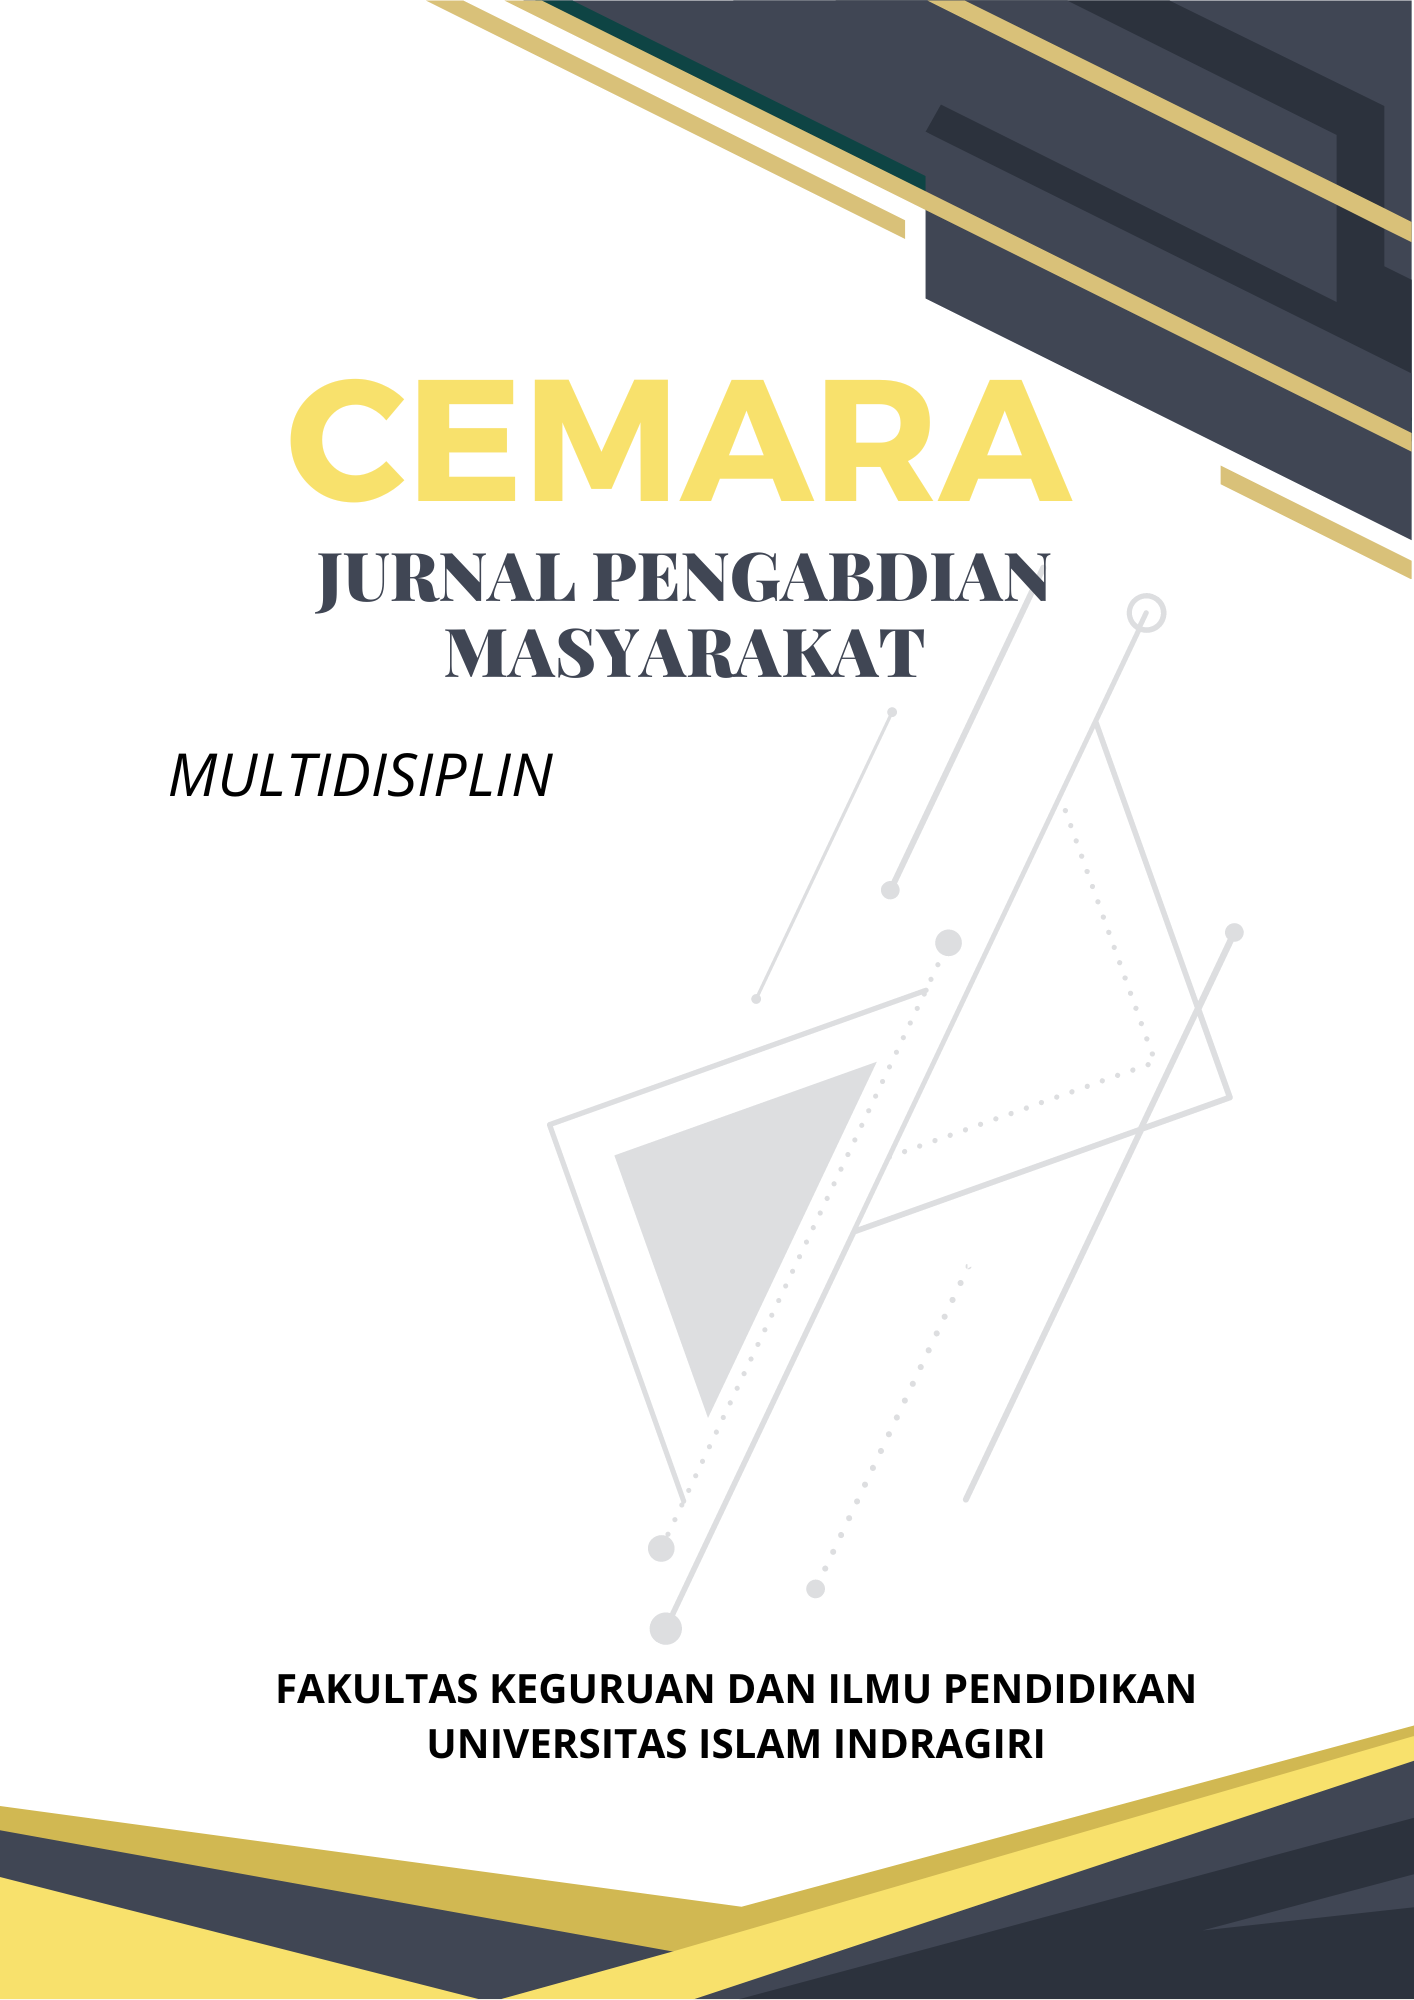 Jurnal Pengabdian Pada Masyarakat CEMARA, is a scientific multidisciplinary journal published by Teacher Training Faculty of Islamic University of Indragiri, Tembilahan. It is in the national level that covers a lot of common problems or issues related to community services. The aim of this journal publication is to disseminate the conceptual thoughts or ideas and research results that have been achieved in the area of community services. Authors who want to submit their manuscript to the editorial office of CEMARA should obey the writing guidelines. If the manuscript submitted is not appropriate with the guidelines or written in a different format, it will BE REJECTED by the editors before further reviewed. The editors will only accept the manuscripts which meet the assigned format. CEMARA is published twice a year, June and December. Please submit your manuscript.